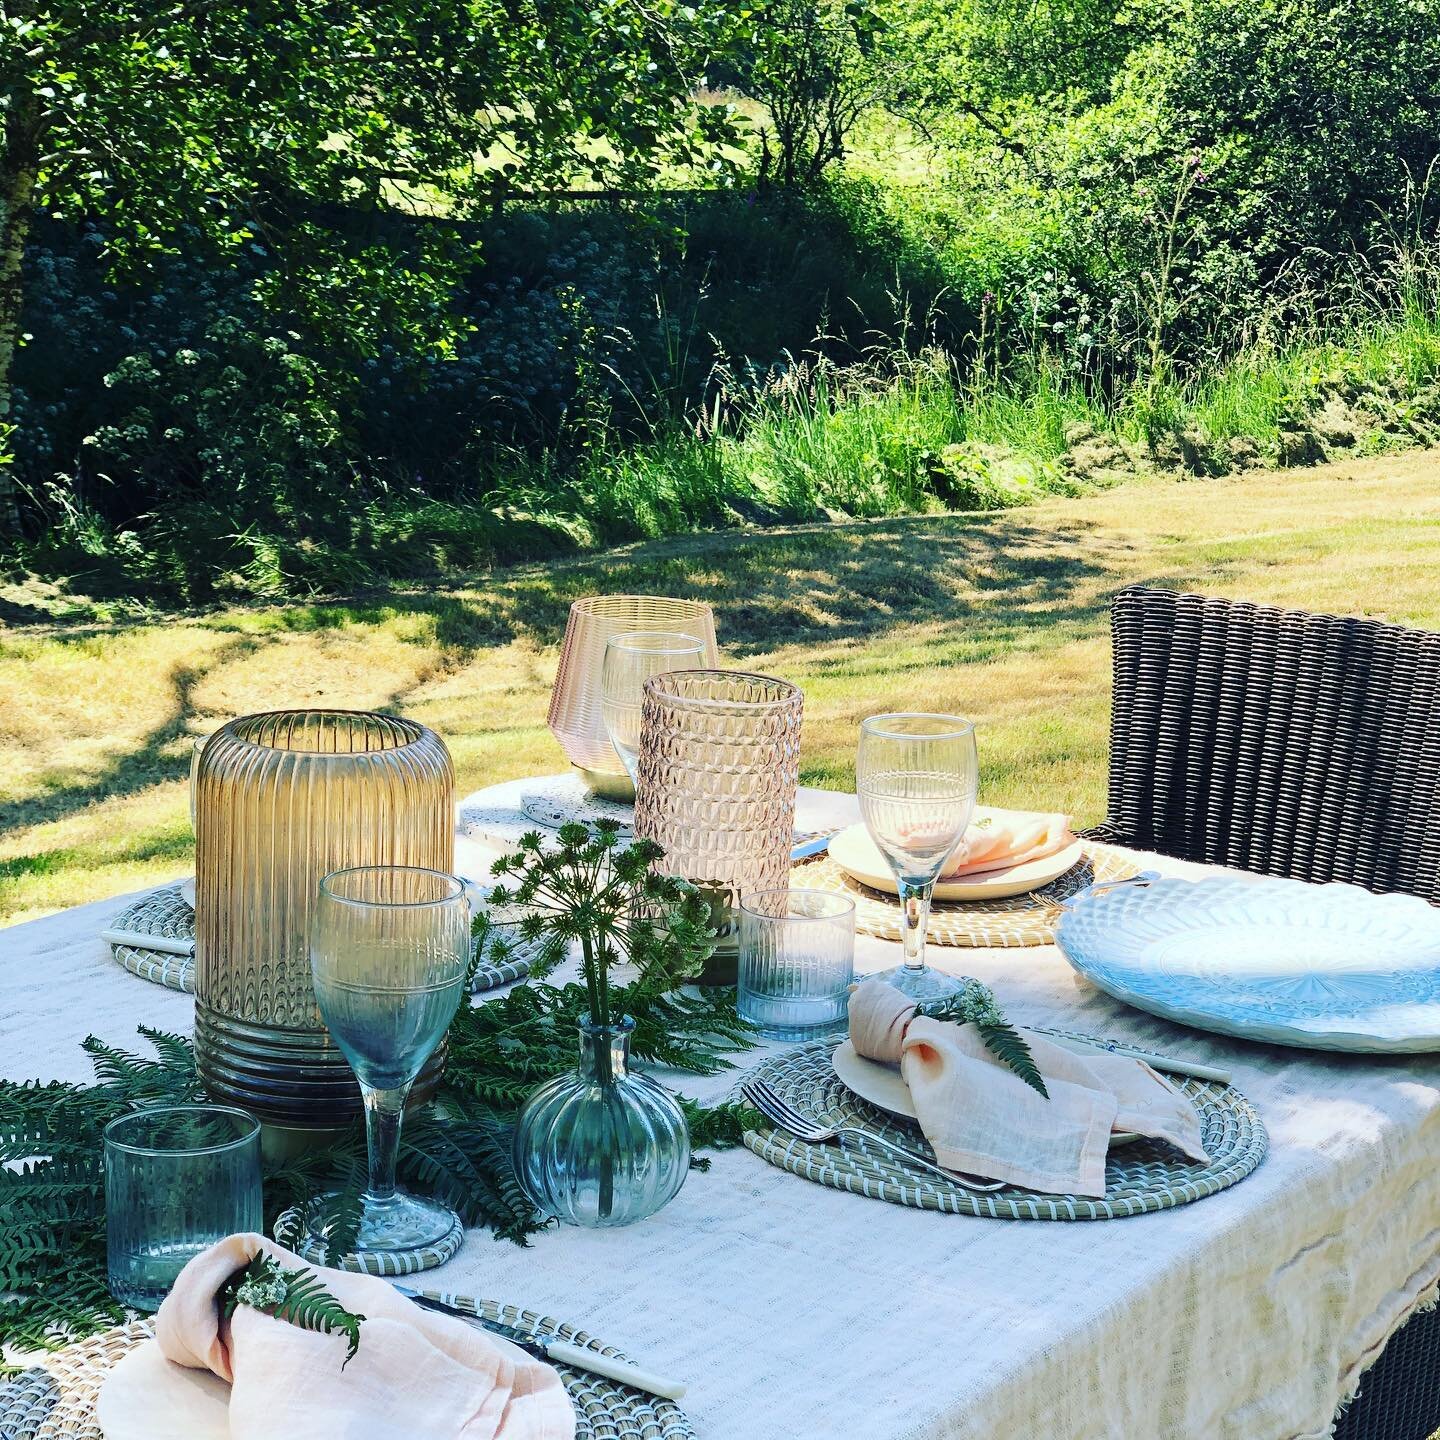 Sunny days by the river Barle at the bottom of the garden&hellip;.heaven!

#exmoorlife #entertainingathome #entertaininginstyle #outdoorentertaining #thesunnyset #tablescapes